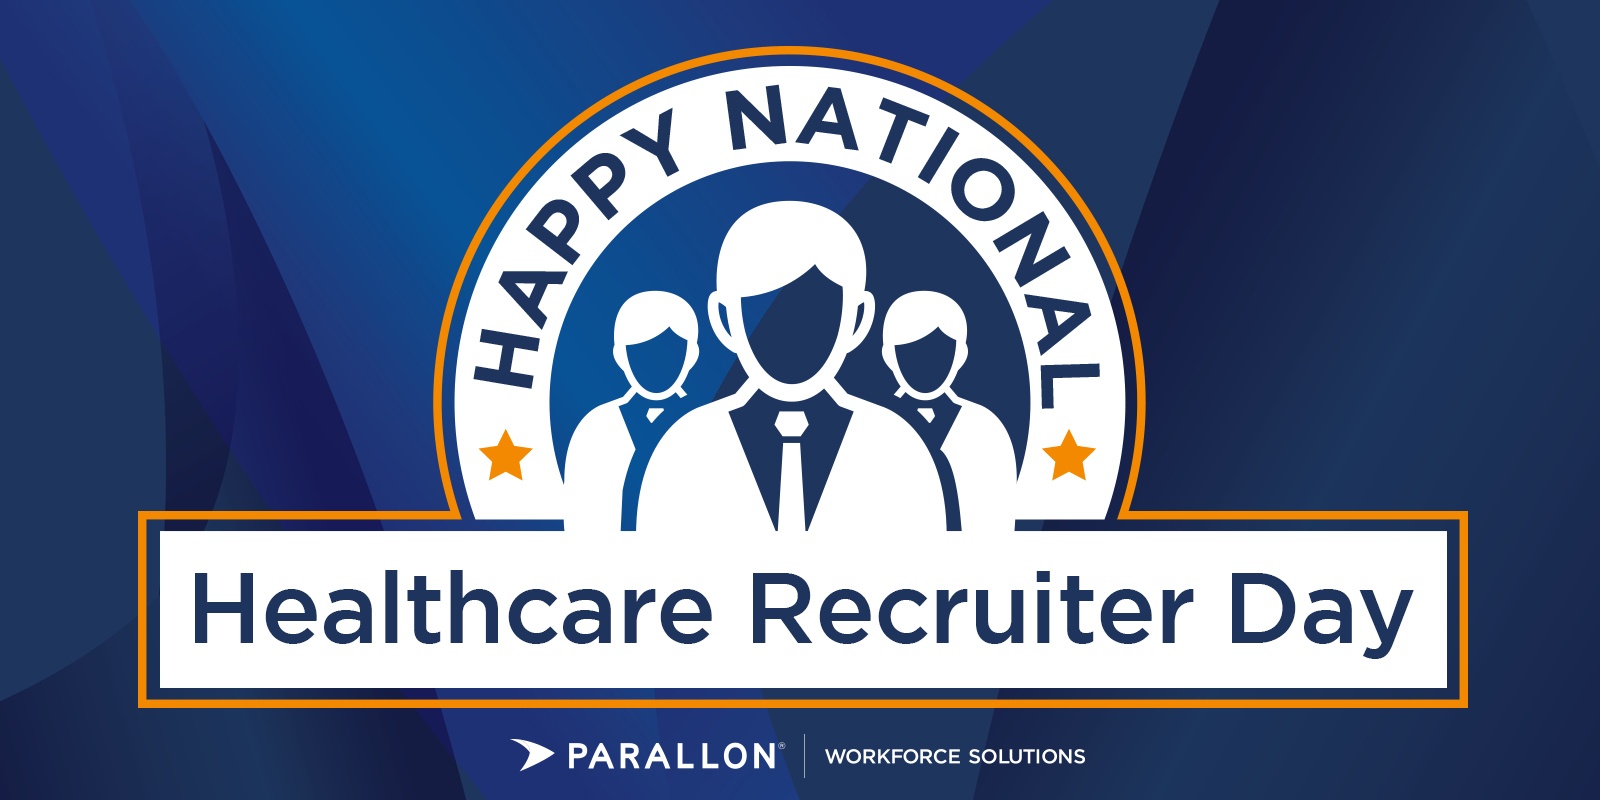 PWS Loves Healthcare Recruiters!